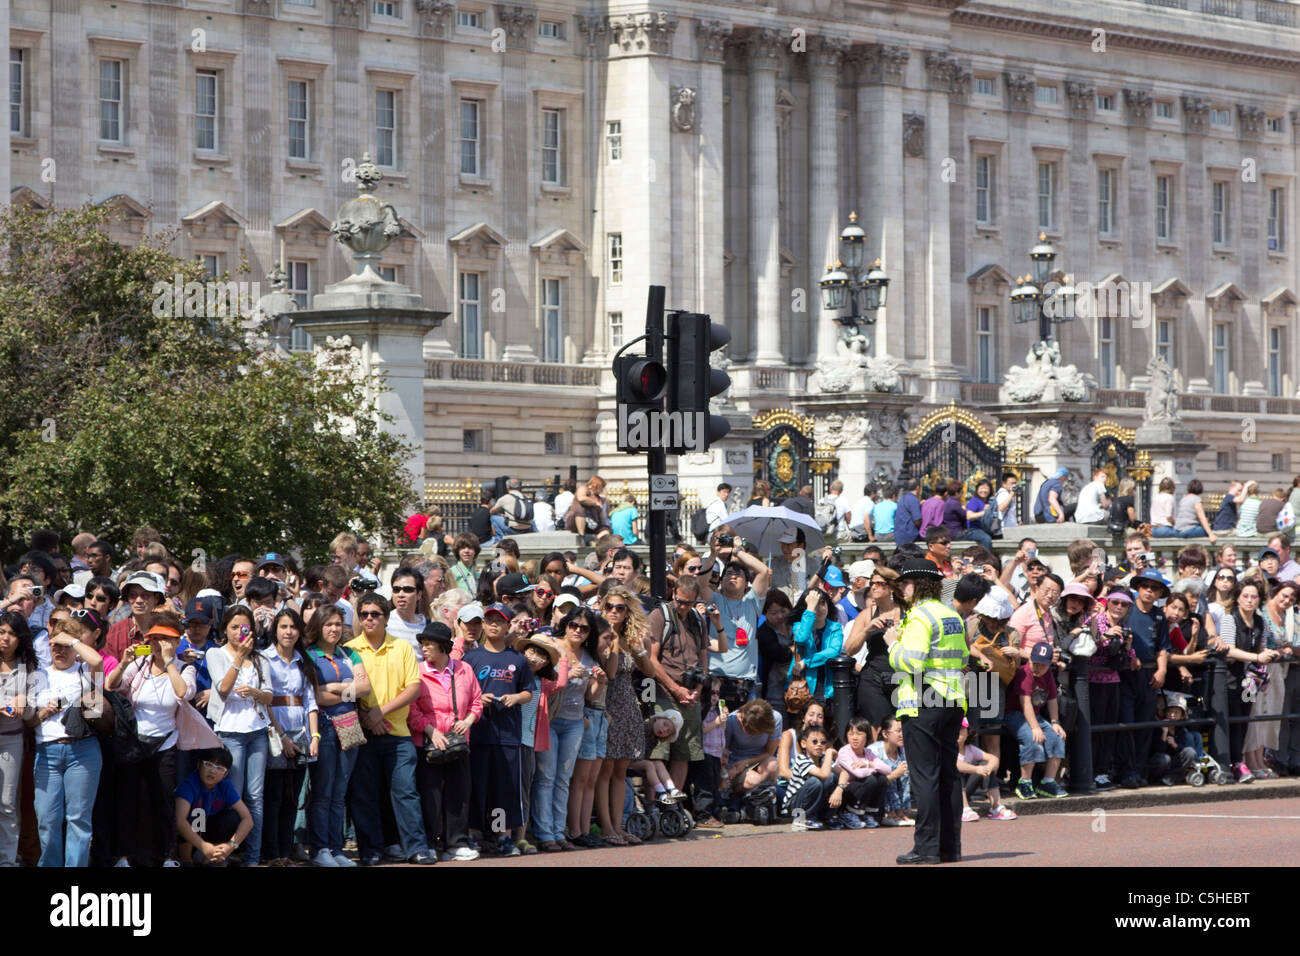 Crowds of Tourists at Buckingham Palace just before the start of the changing of the guard ceremony Stock Photo